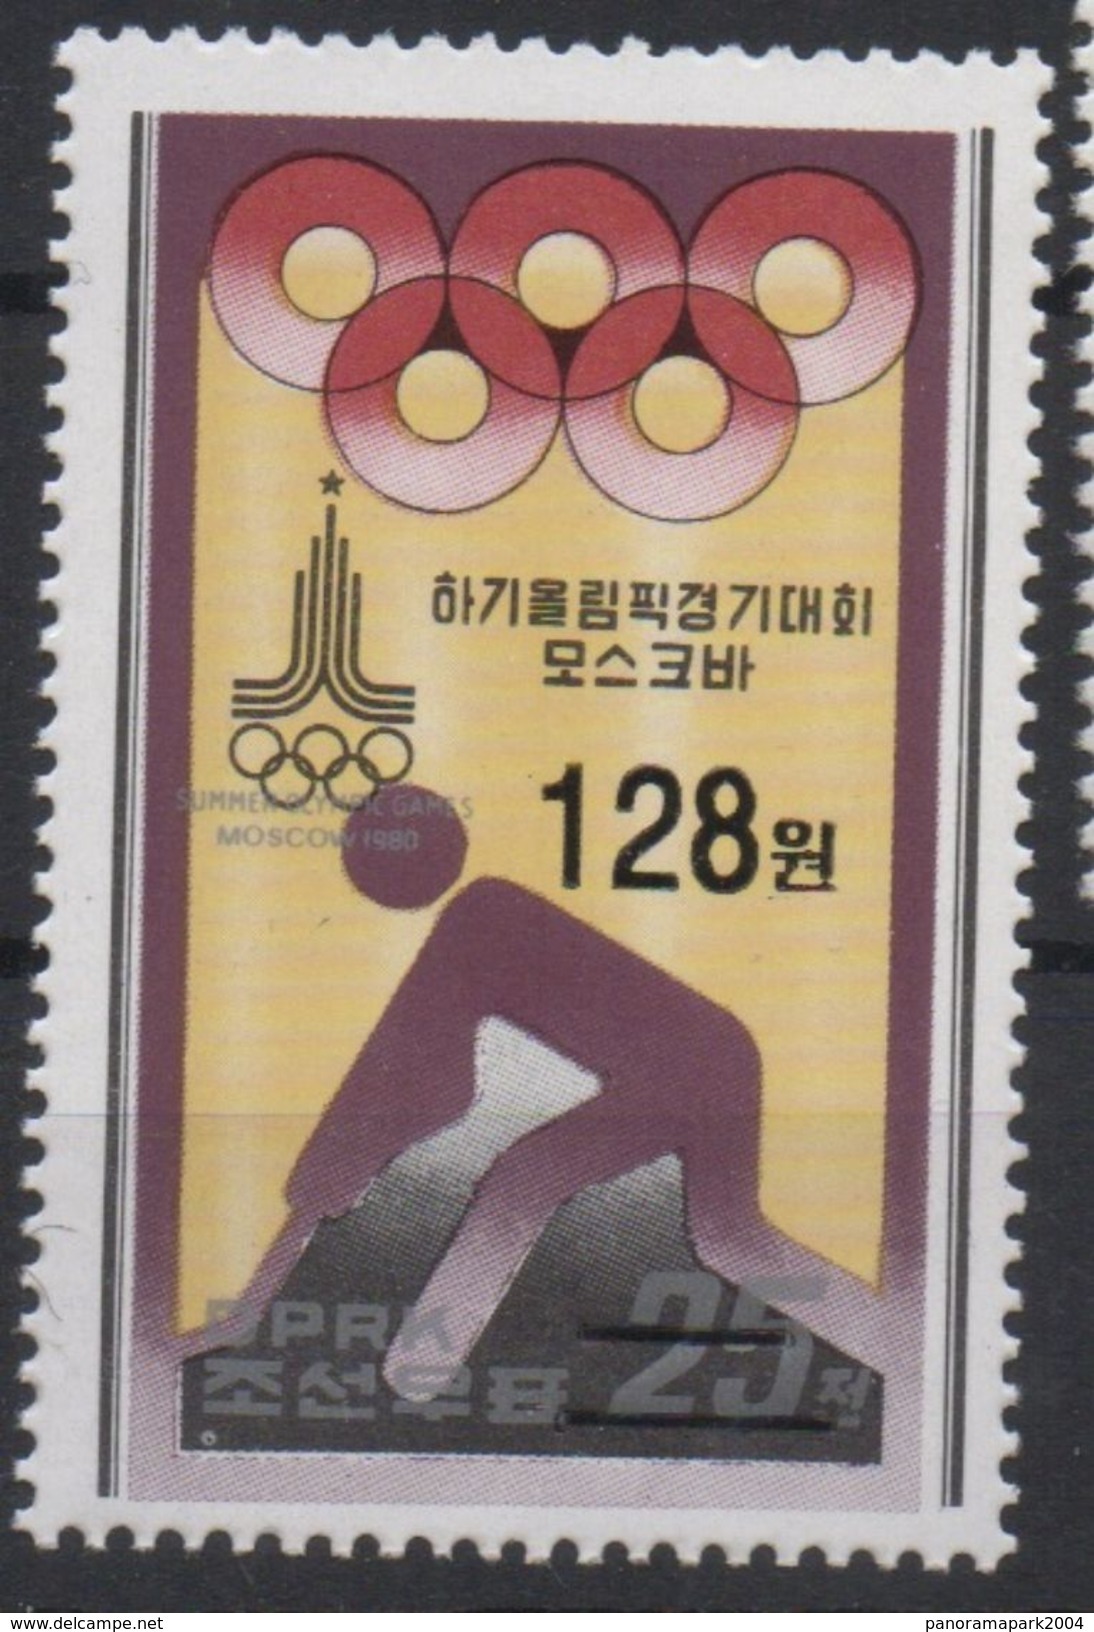 North Korea Corée Du Nord 2006 Mi. 5098 OVERPRINT Olympic Games Jeux Olympiques MOSCOW MOSCOU 1980 MOSKAU MNH** Olympia - Sommer 1980: Moskau